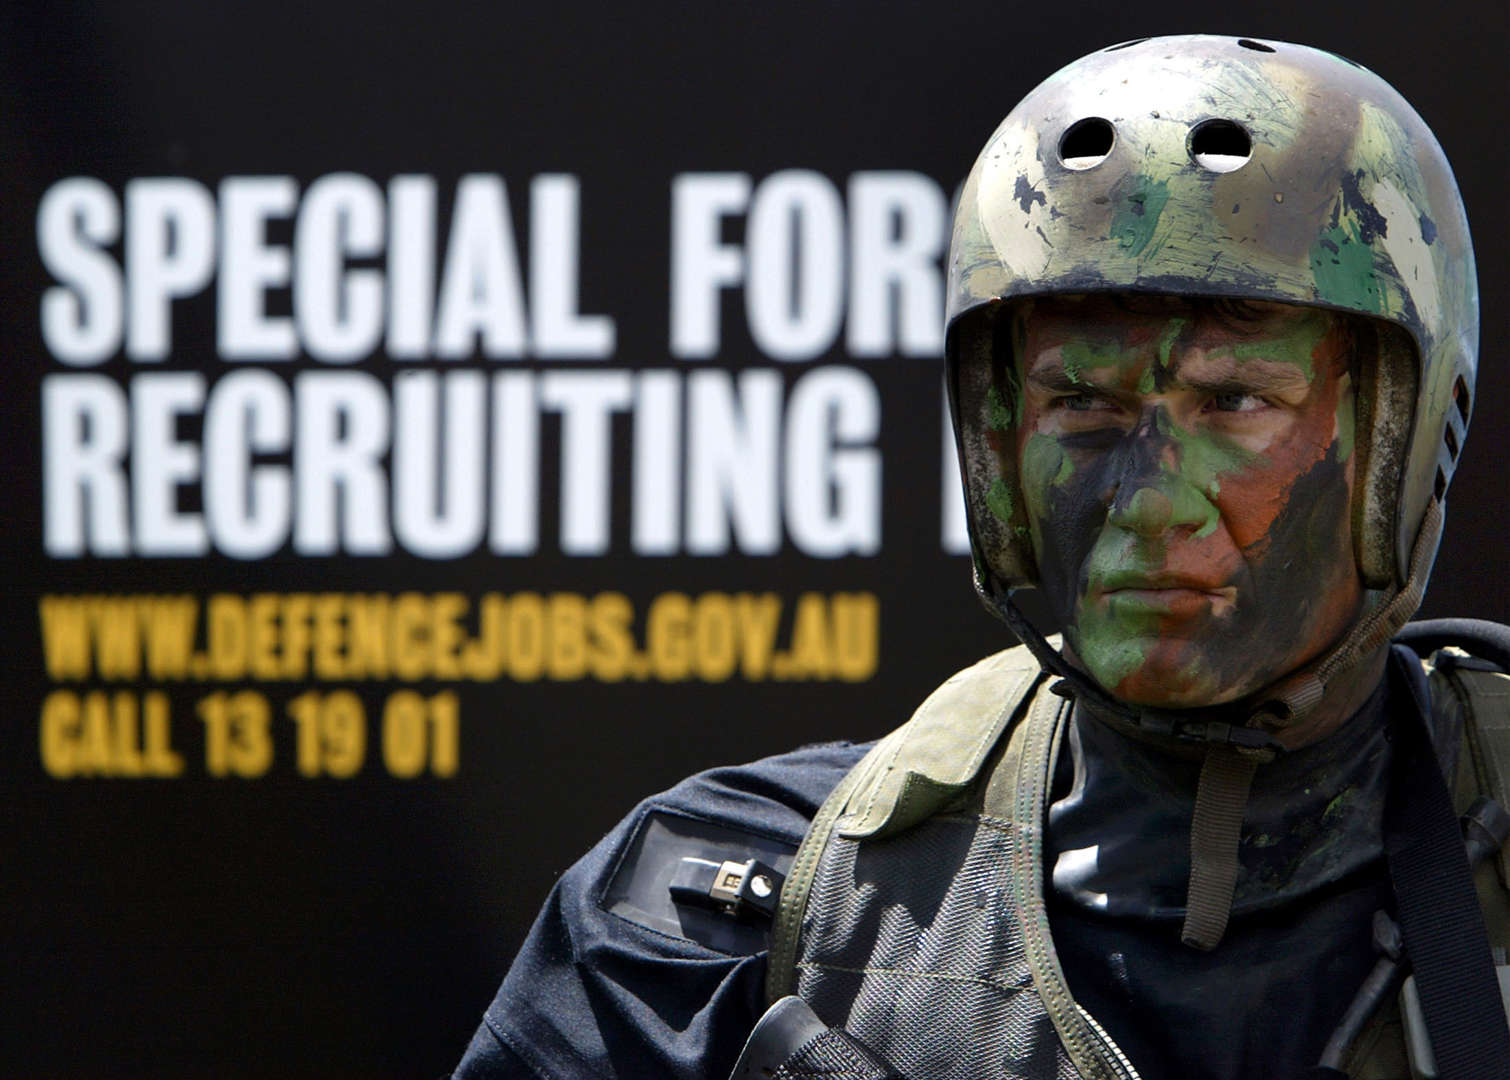 A Special Air Services (SAS) oldier stands in front of a recruitment poster in Sydney October 20, 2003 after a demonstration of their skills as part of a public recruitment drive for more than 300 elite SAS troops by the defense force in order to bolster defense capabilities due to the war on terror. The break with tradition of only recruiting elite soldiers from within defense ranks was necessary to fill an extra 334 commando places announced by the government earlier in the year.